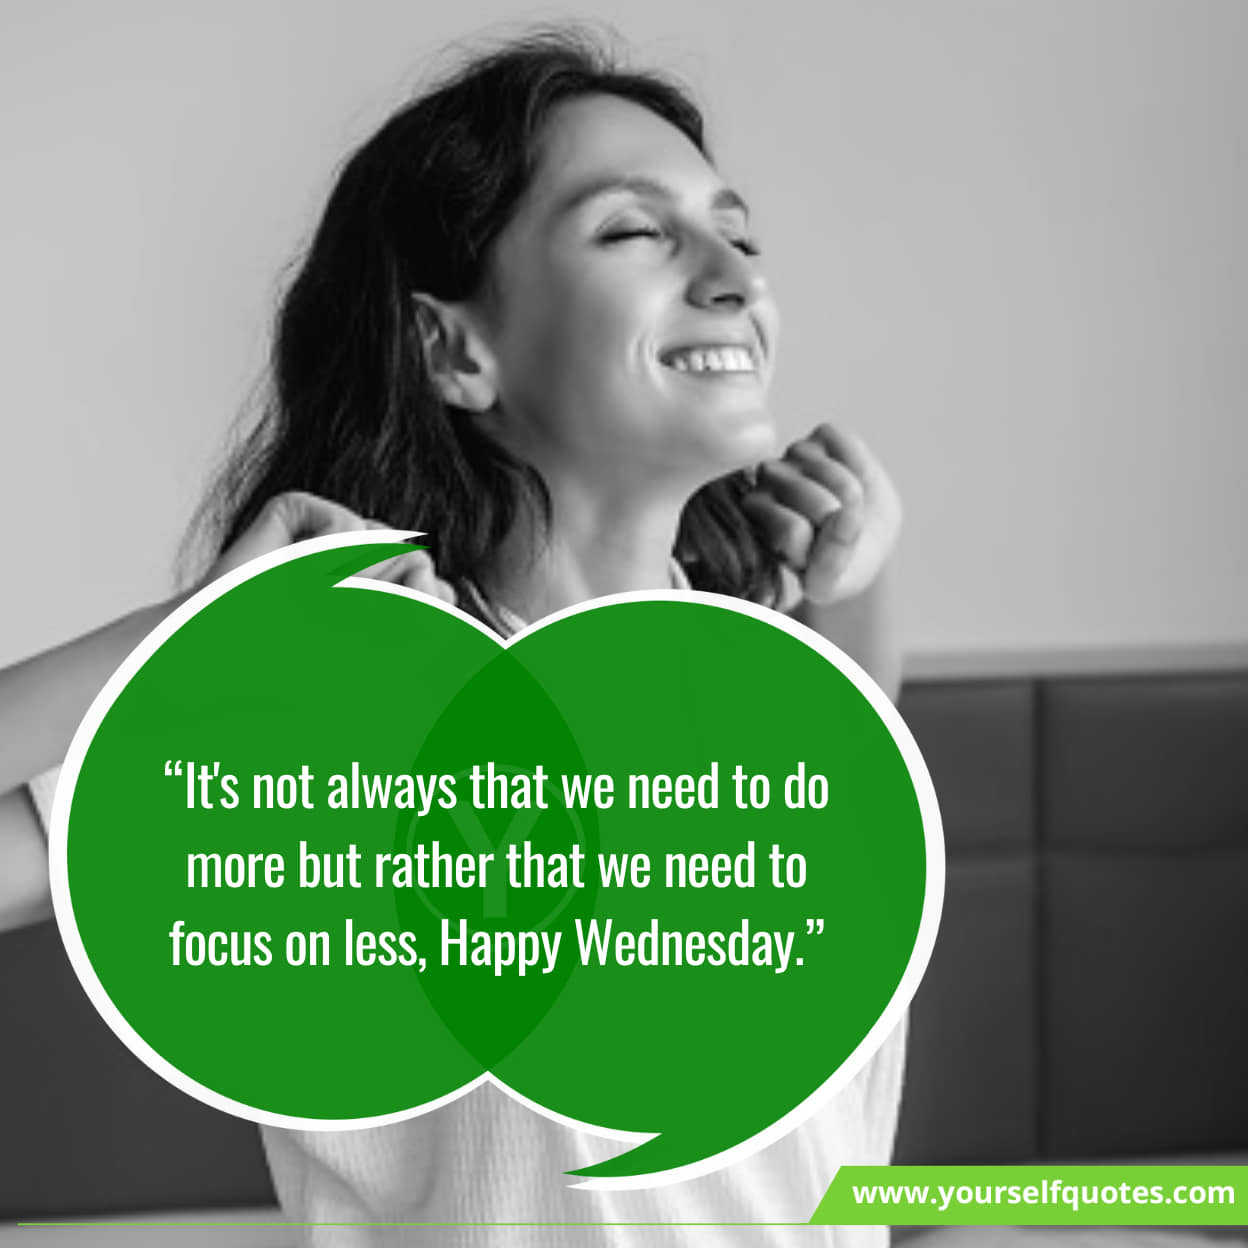 Unique Good Morning Quotes About Wednesday